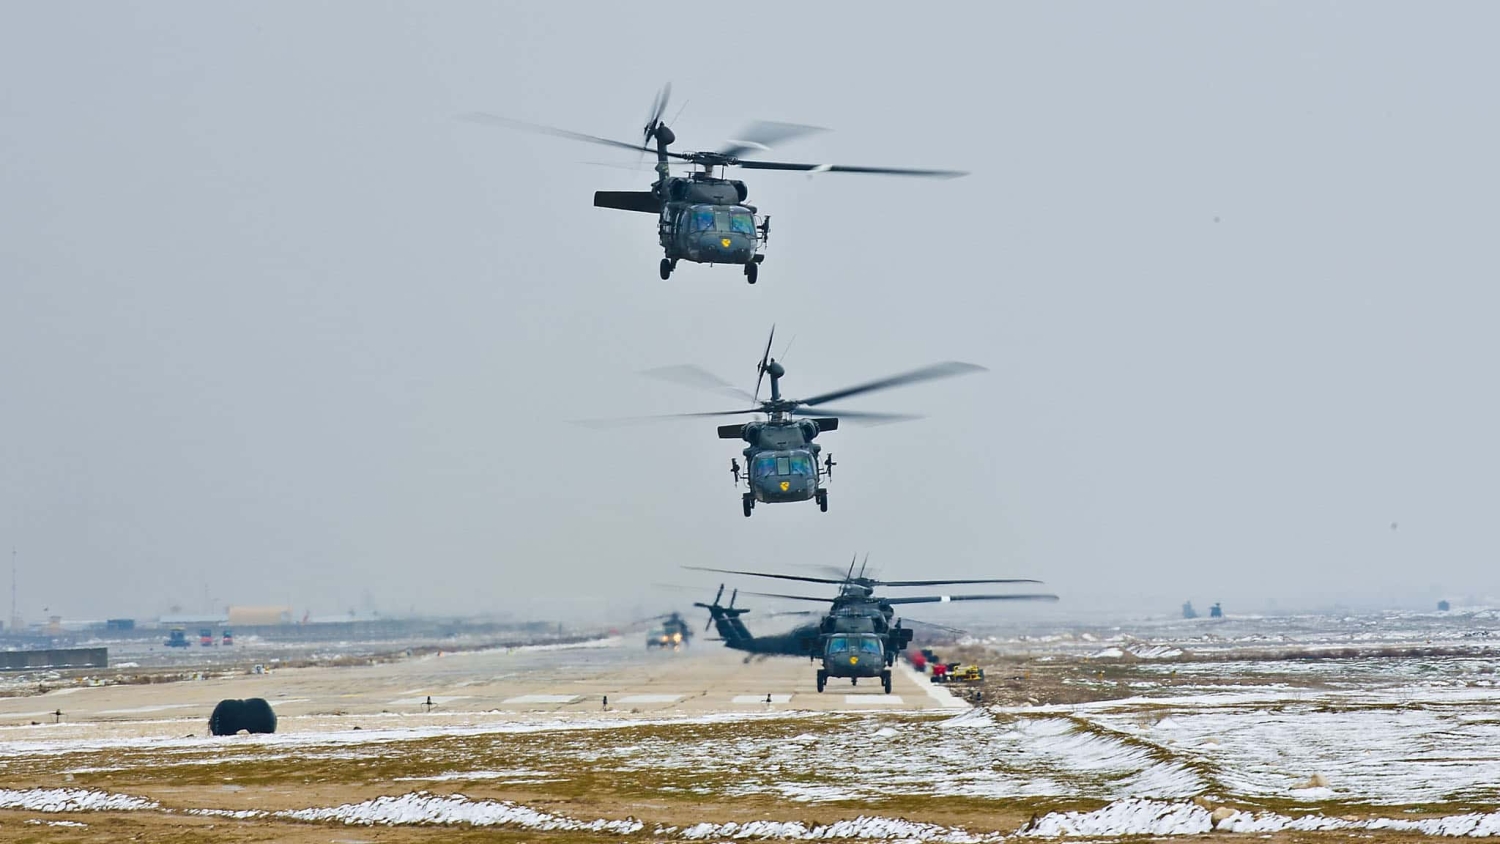 four military helicopters are taking off very close to each other on a snowy airfield